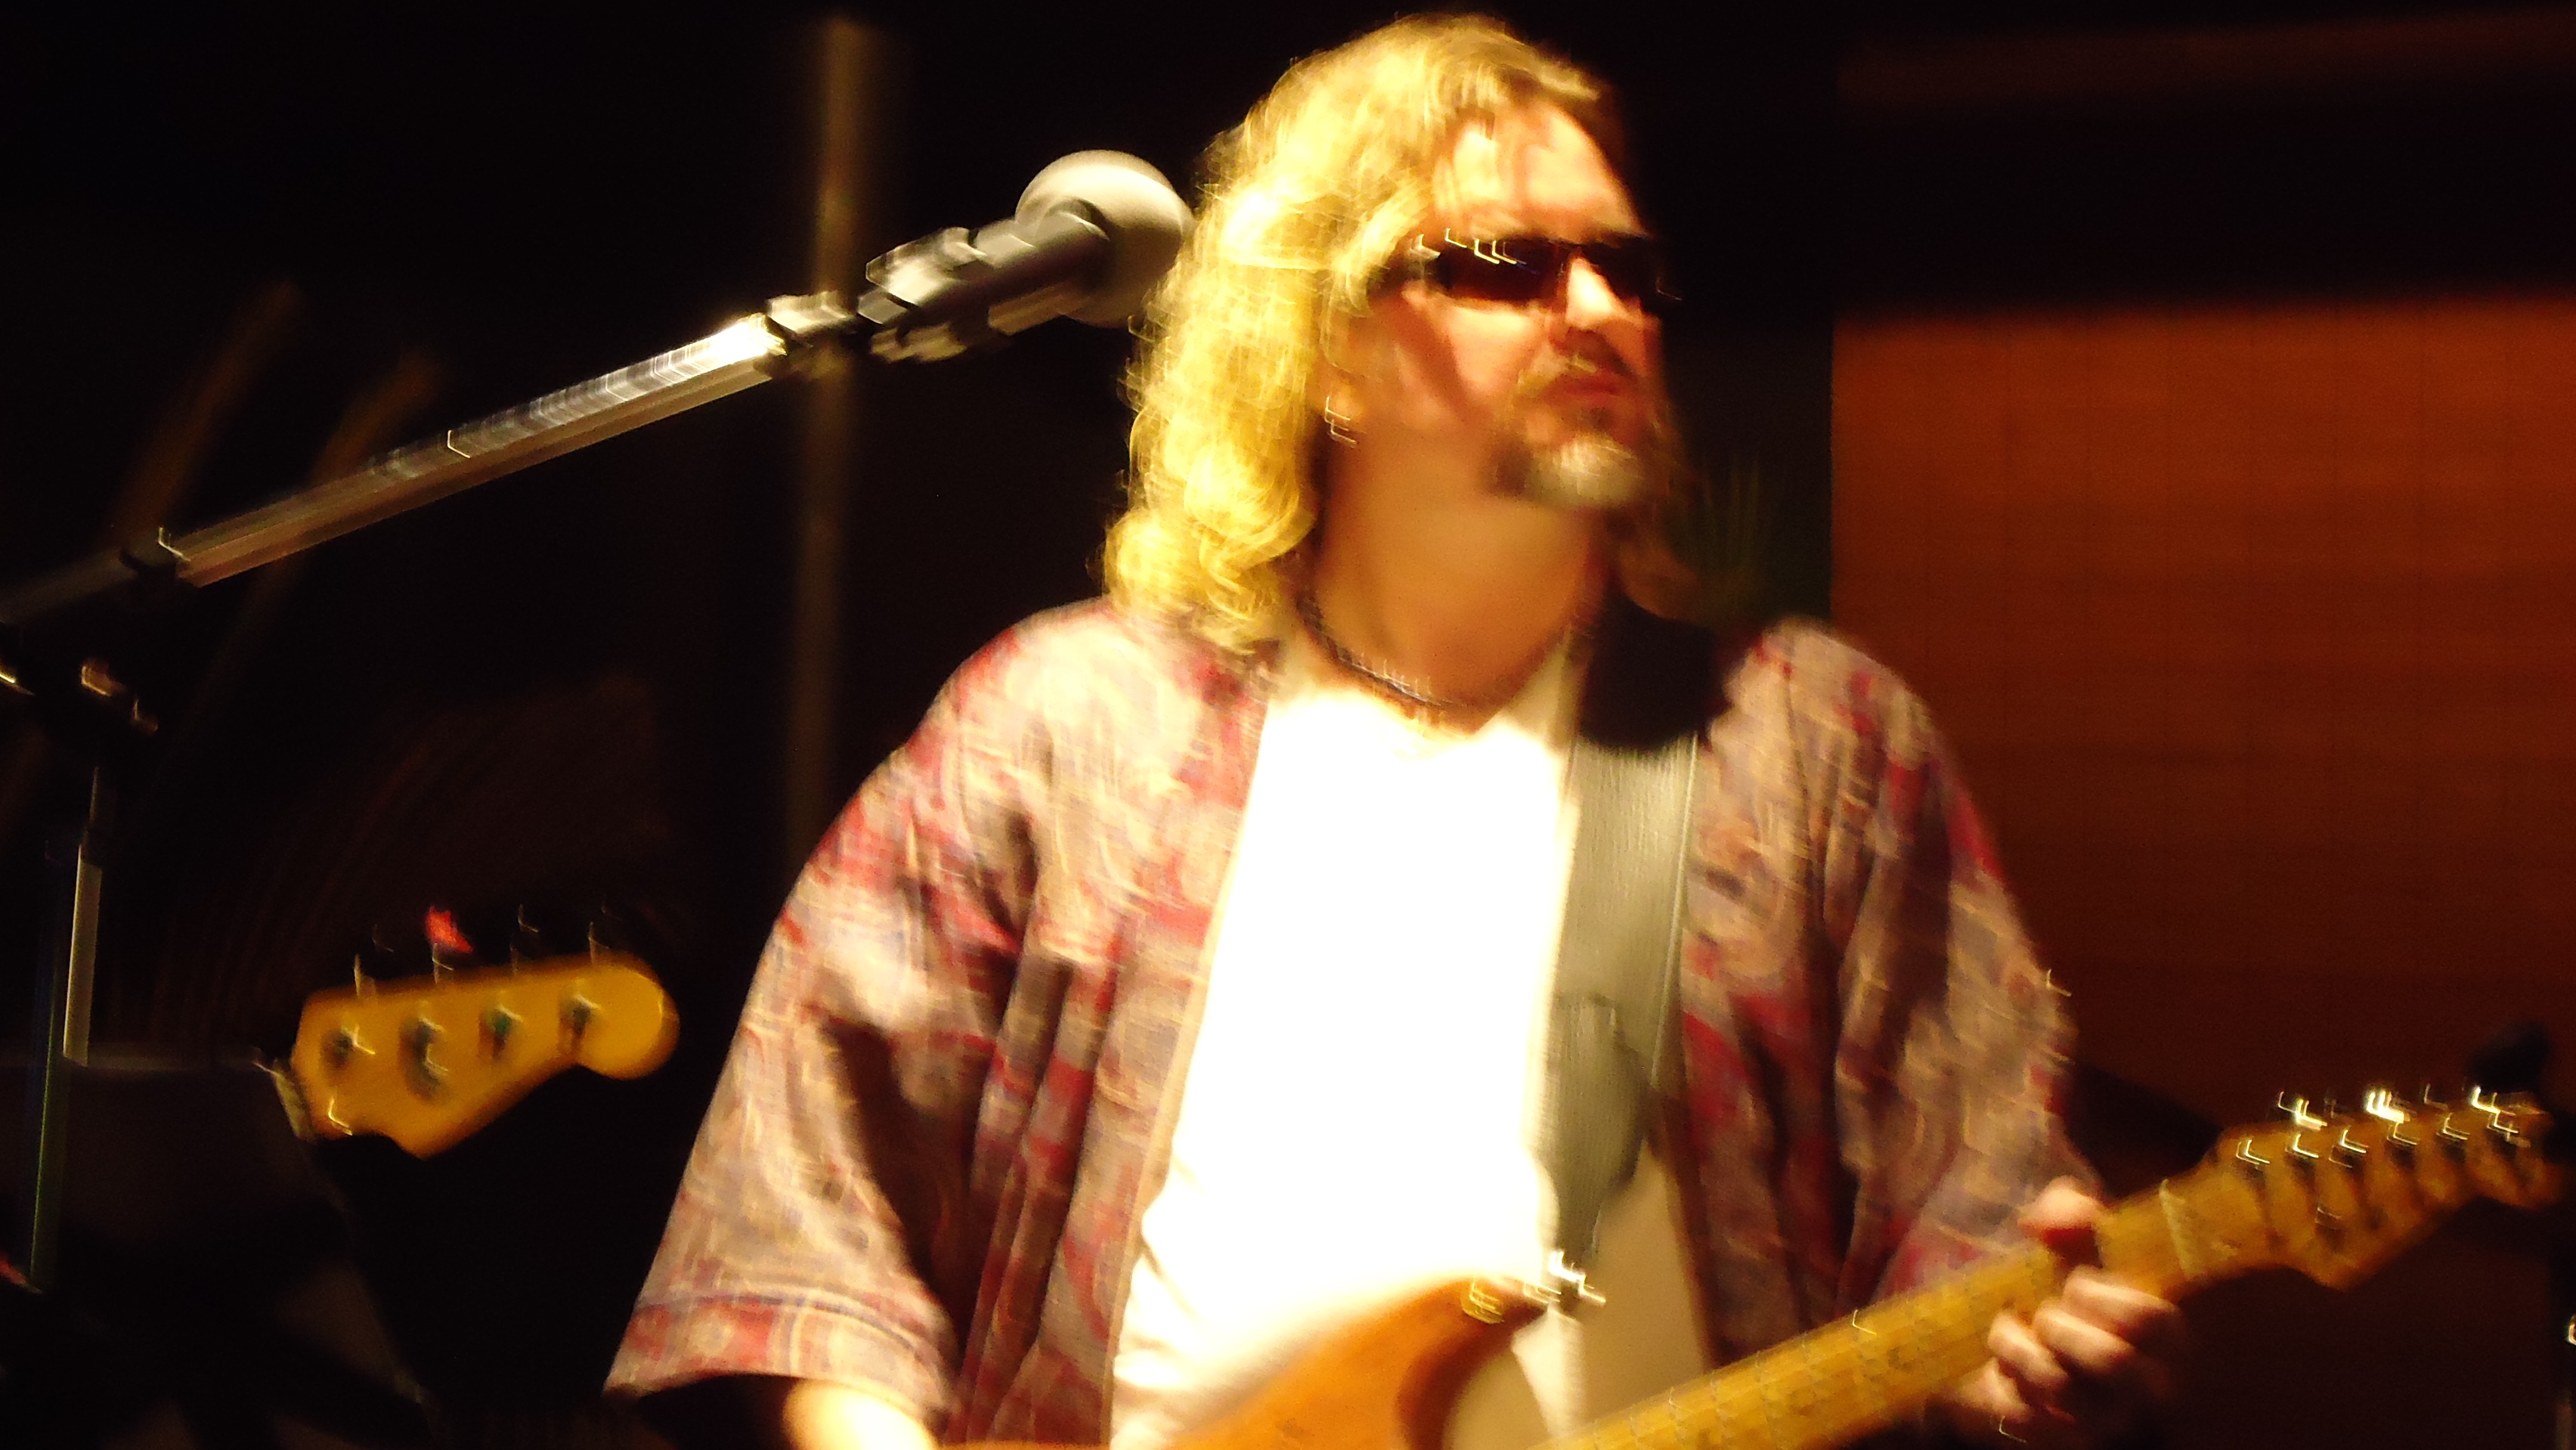 Halloween show. Dressed up as The Dude from Big Lebowski